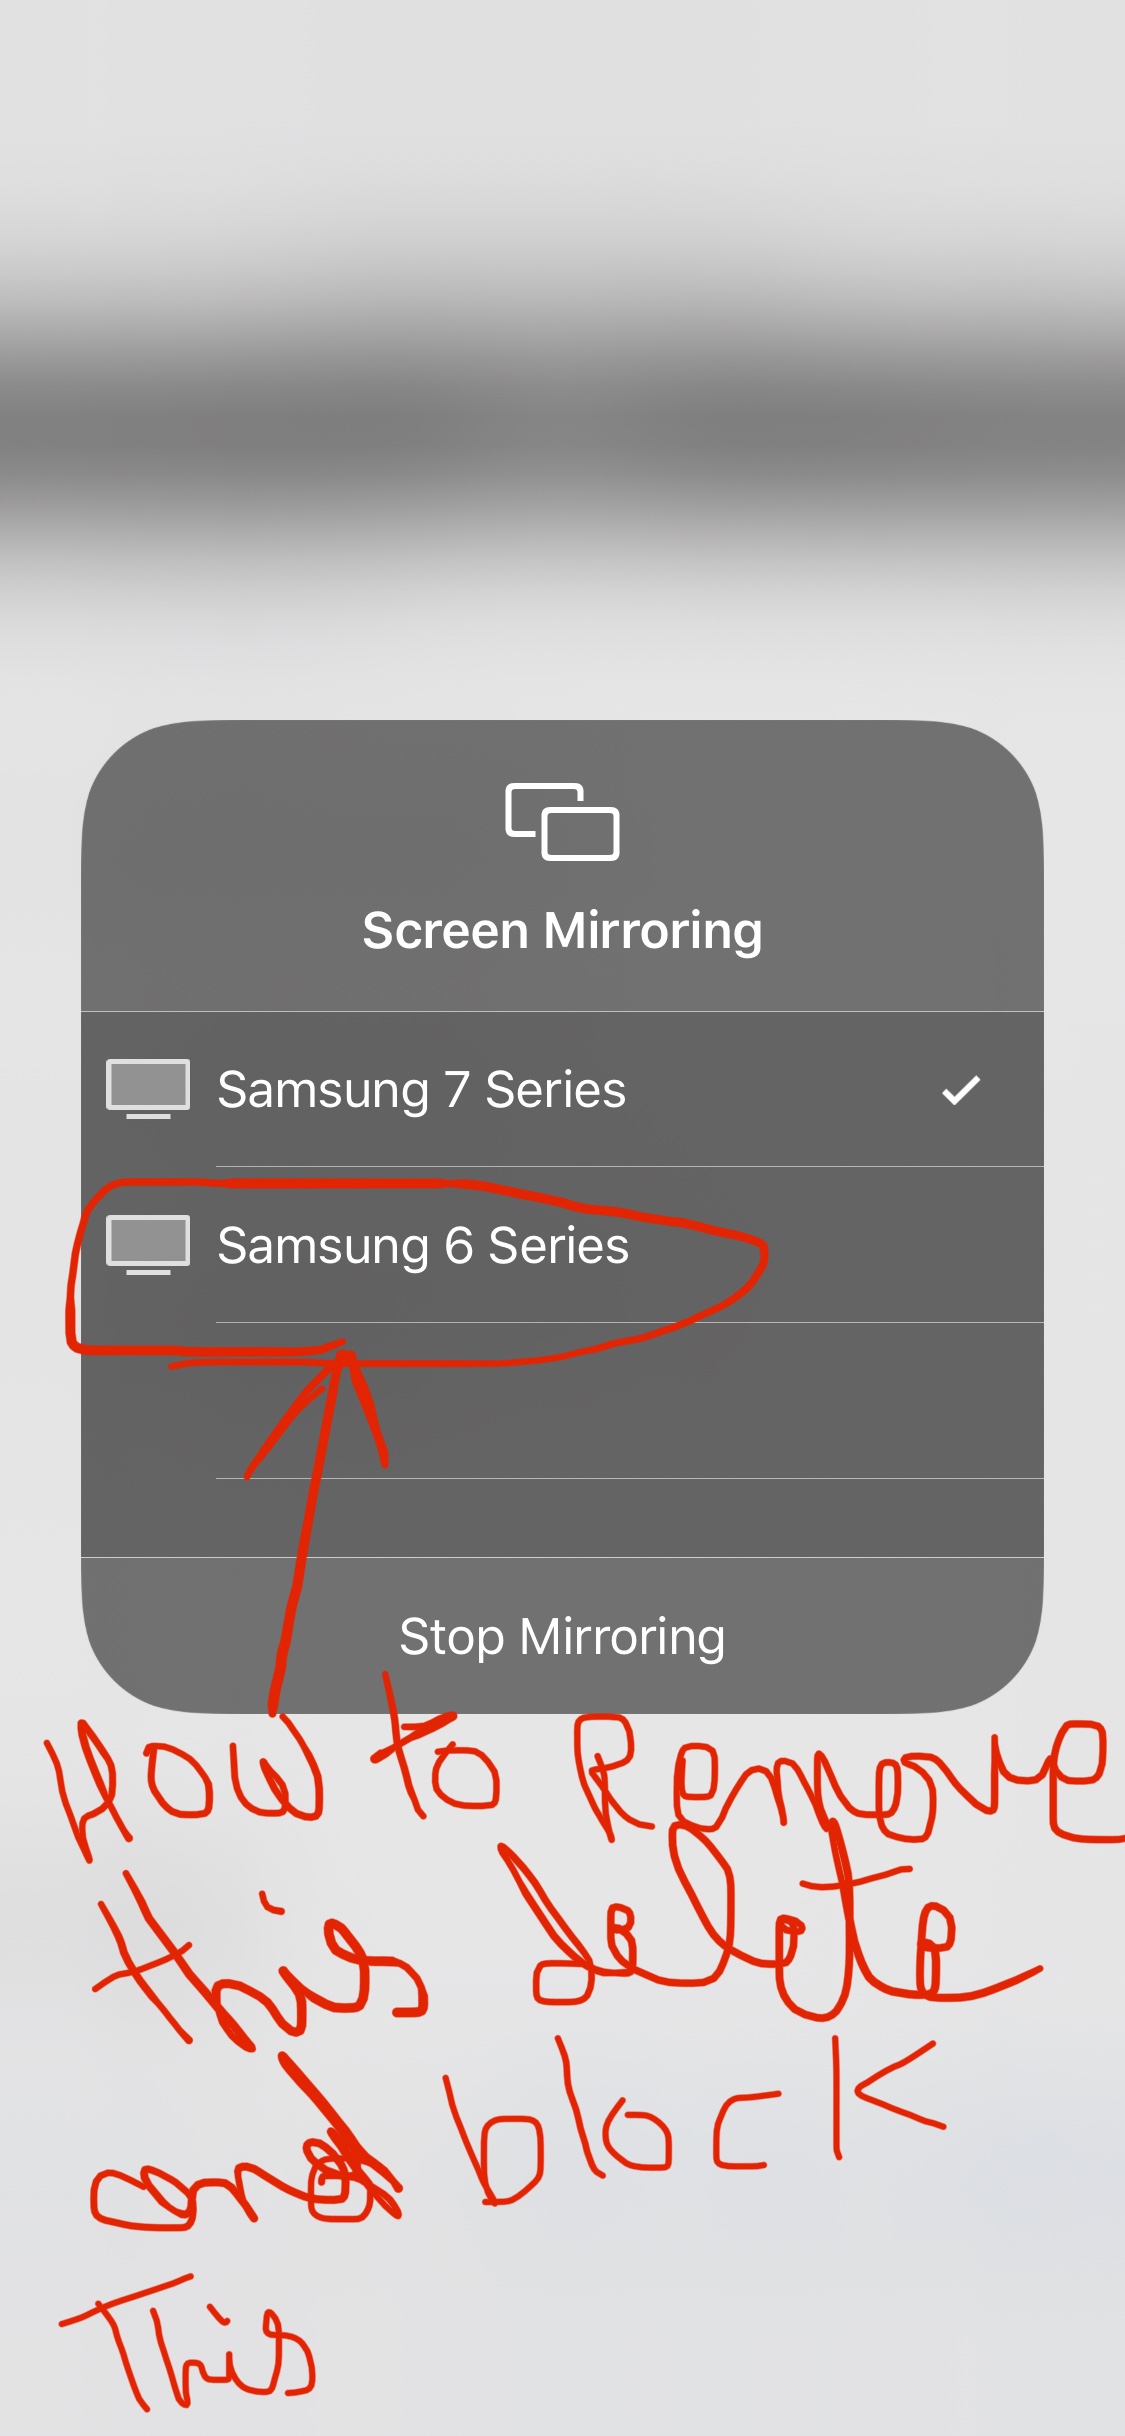 How To Remove Samsung Tv From Iphone, How To Screen Mirror Samsung Tv Iphone